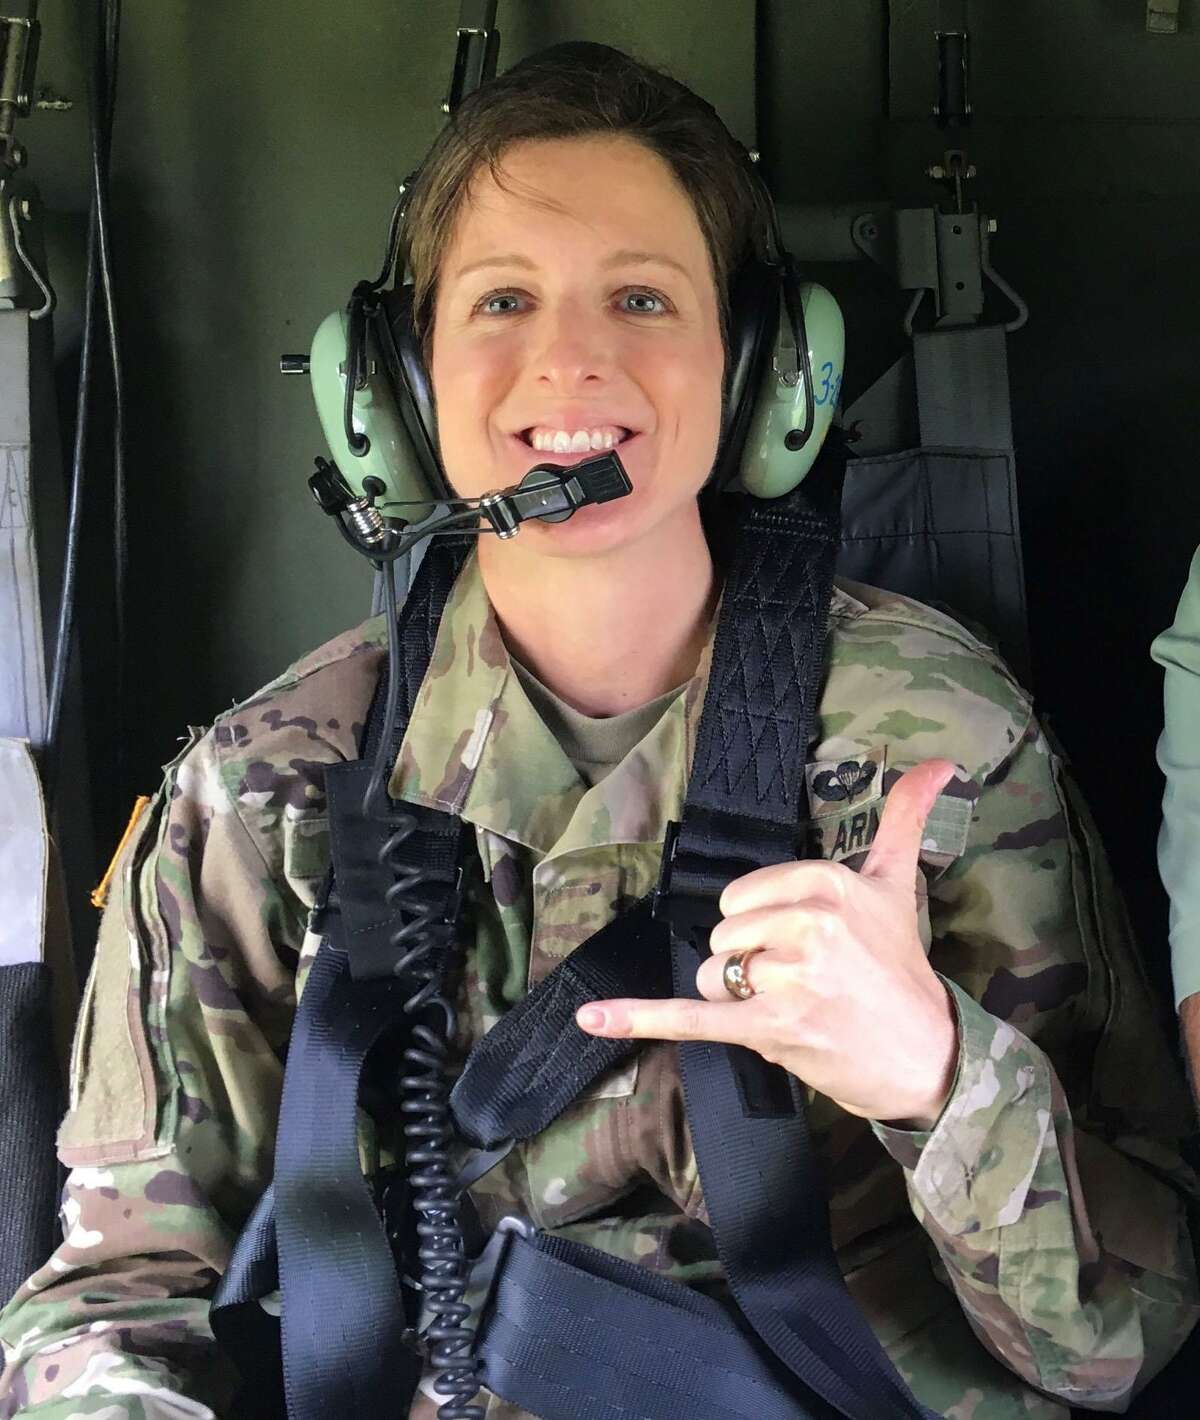 Tara Carr, who spent 25 years in the U.S. Army before retiring in Brookfield, is running for first selectman in November’s election. Courtesy of Tara Carr